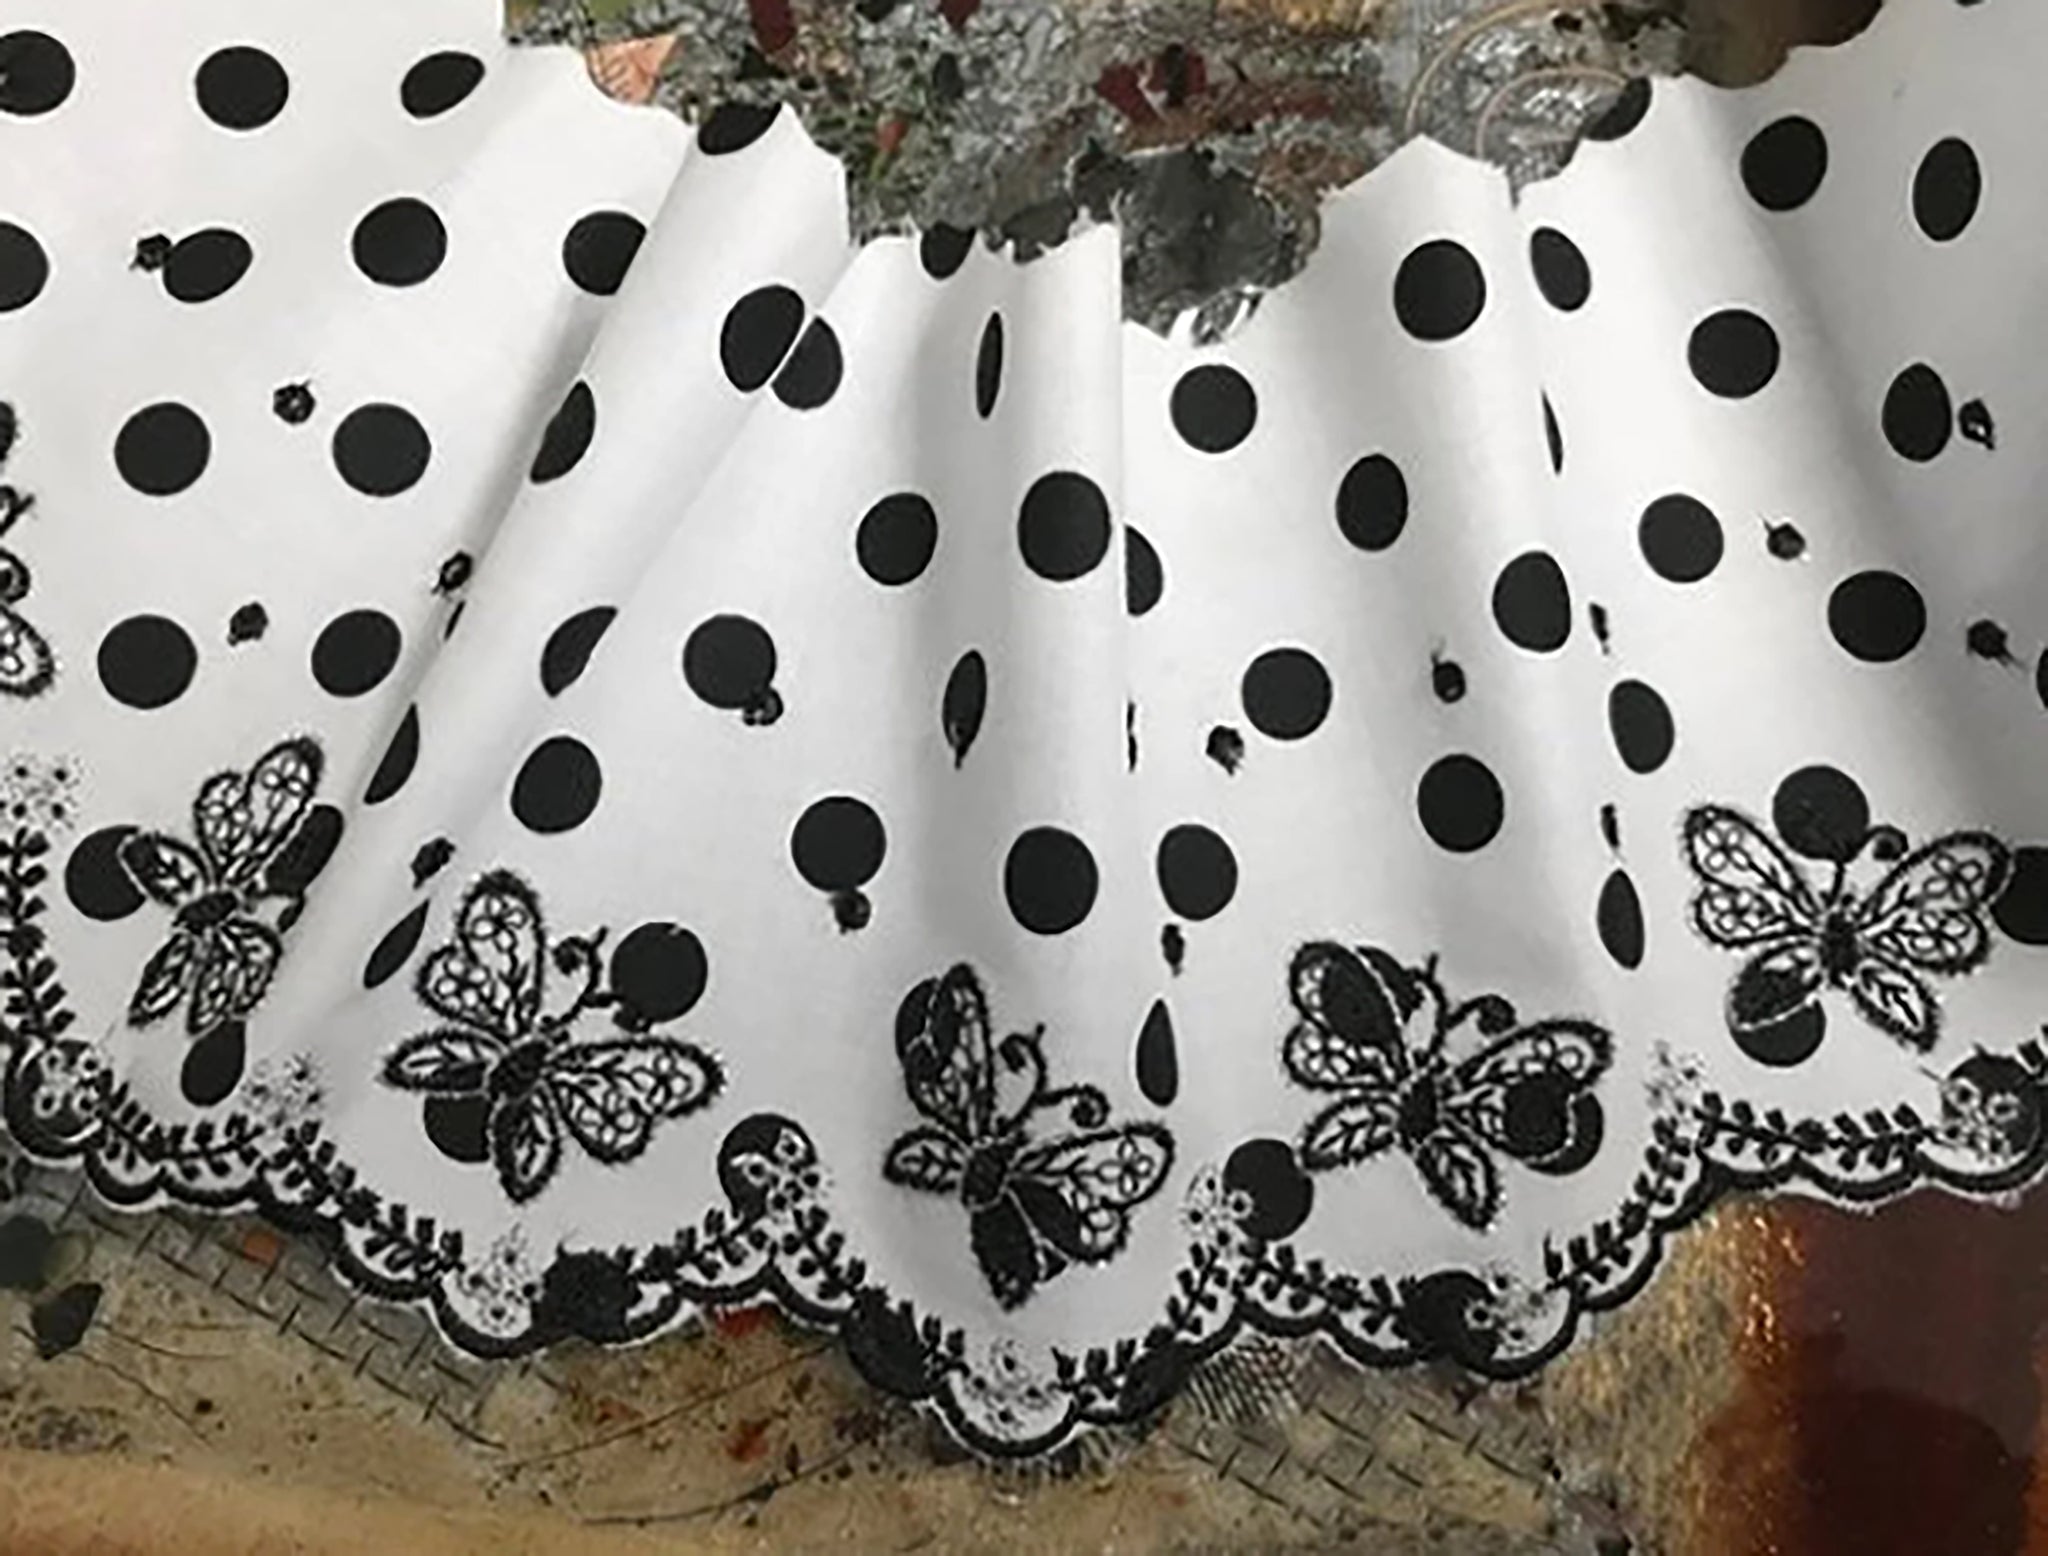 Butterflies Embroidery on Black/White Polka Dots with Silver Threads Accent -  Broderie Anglaise -  Cotton  - 12 cm Wide.cm Wide.